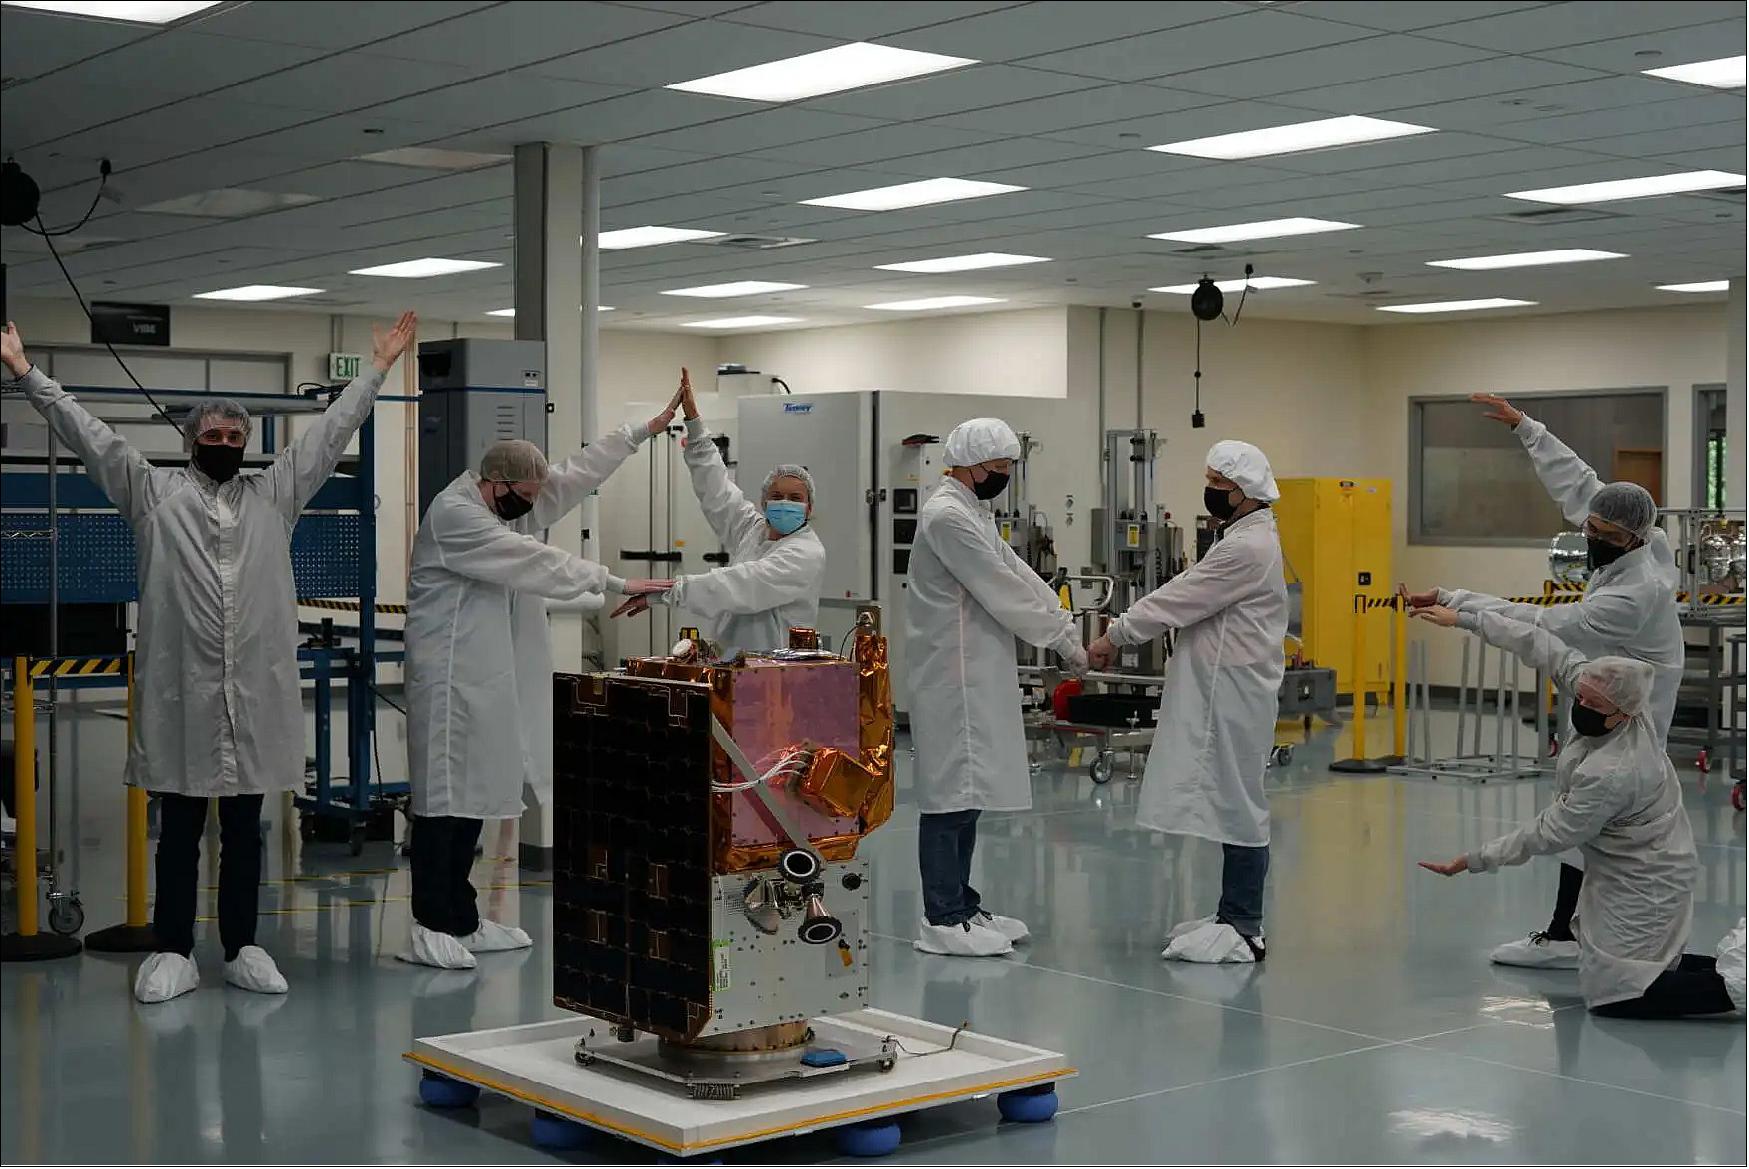 Figure 4: A team of company engineers pose for an image of the YAM-3 spacecraft (image credit: LeoStella)